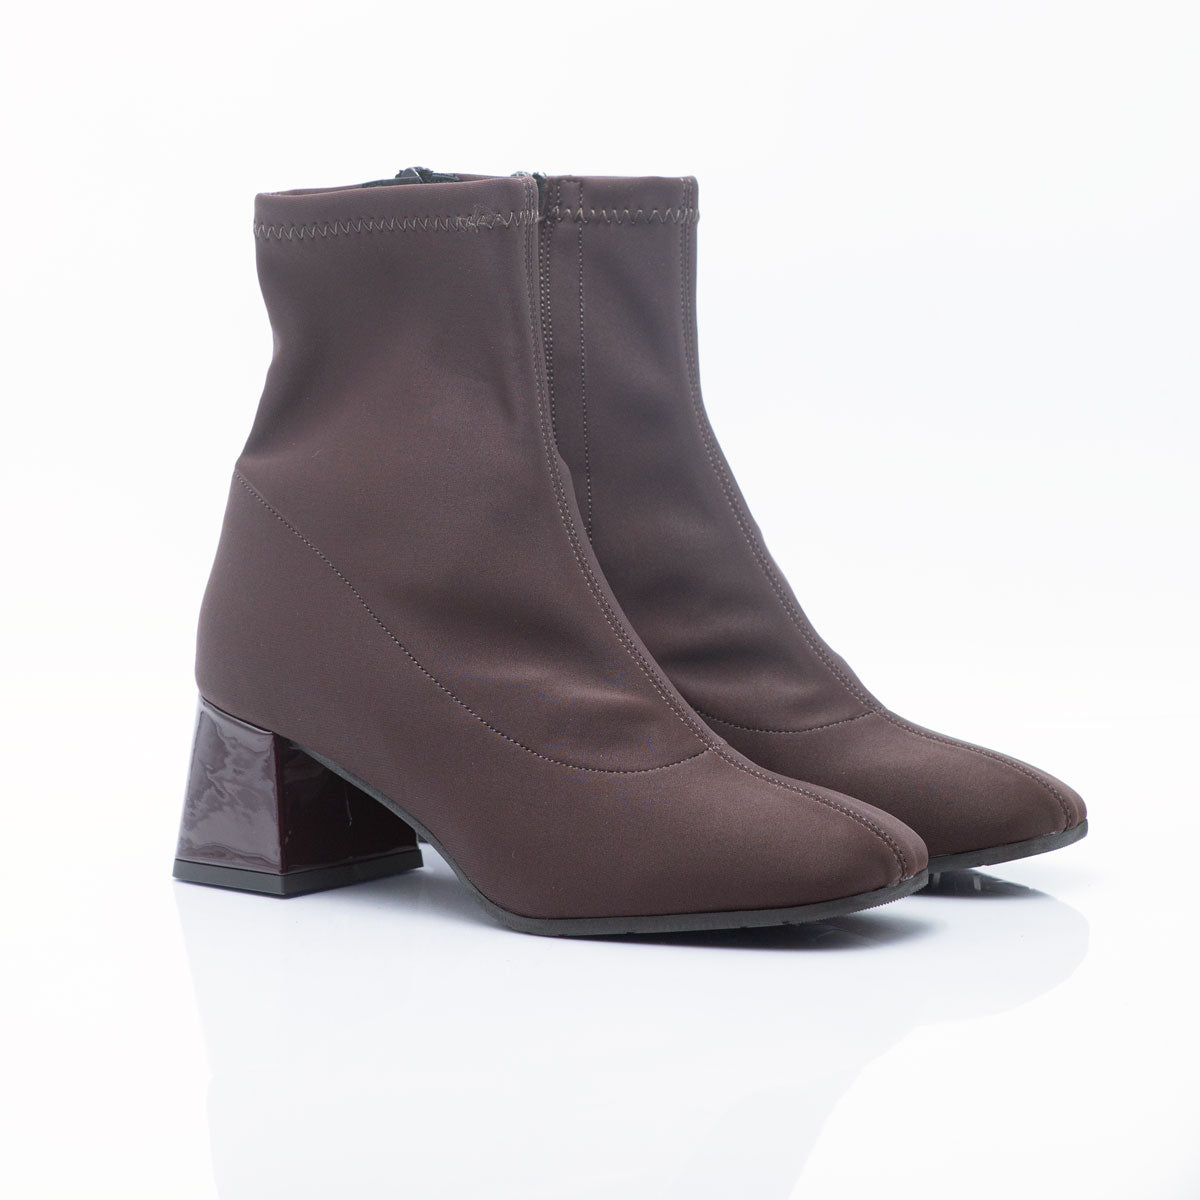 Figini - Brown fabric Ankle Boot with a laser-cut design